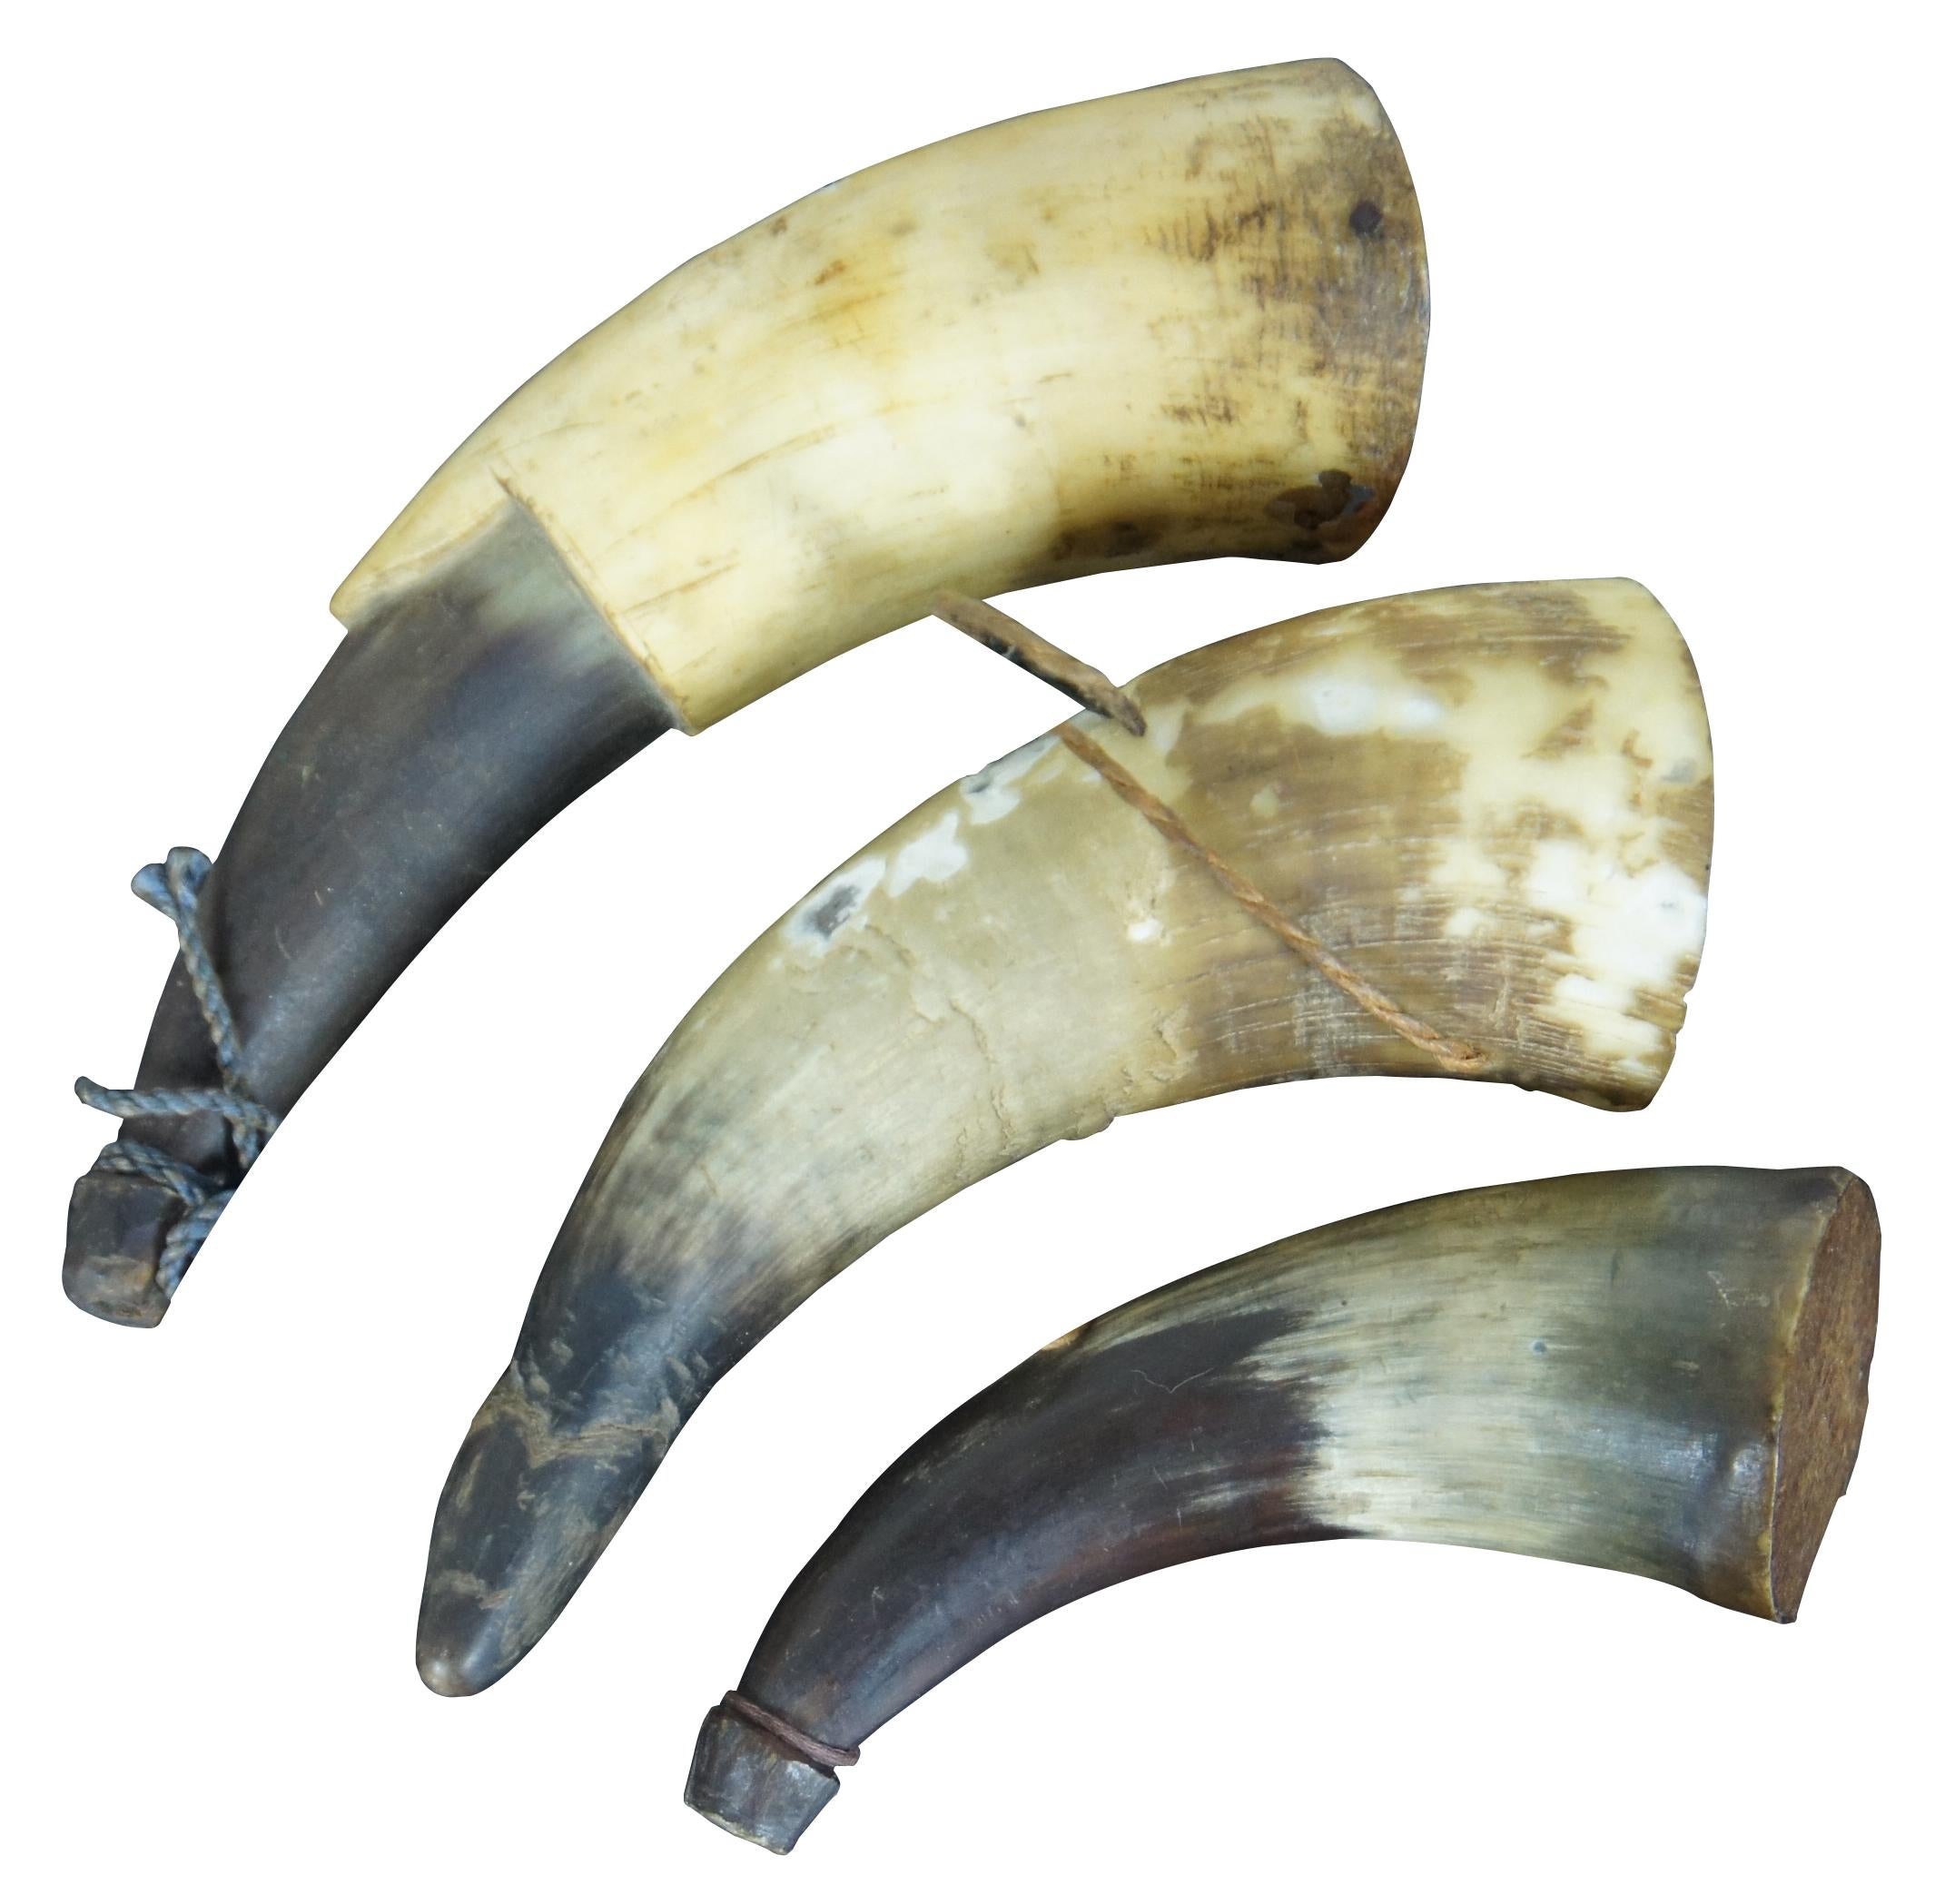 Lot of three small antique horns for black powder, with carrying strings.

Largest - 6.5” x 2.5” x 1.75” / Smallest - 4.75” x 1.75” x 1.5” (Width x Depth x Height)